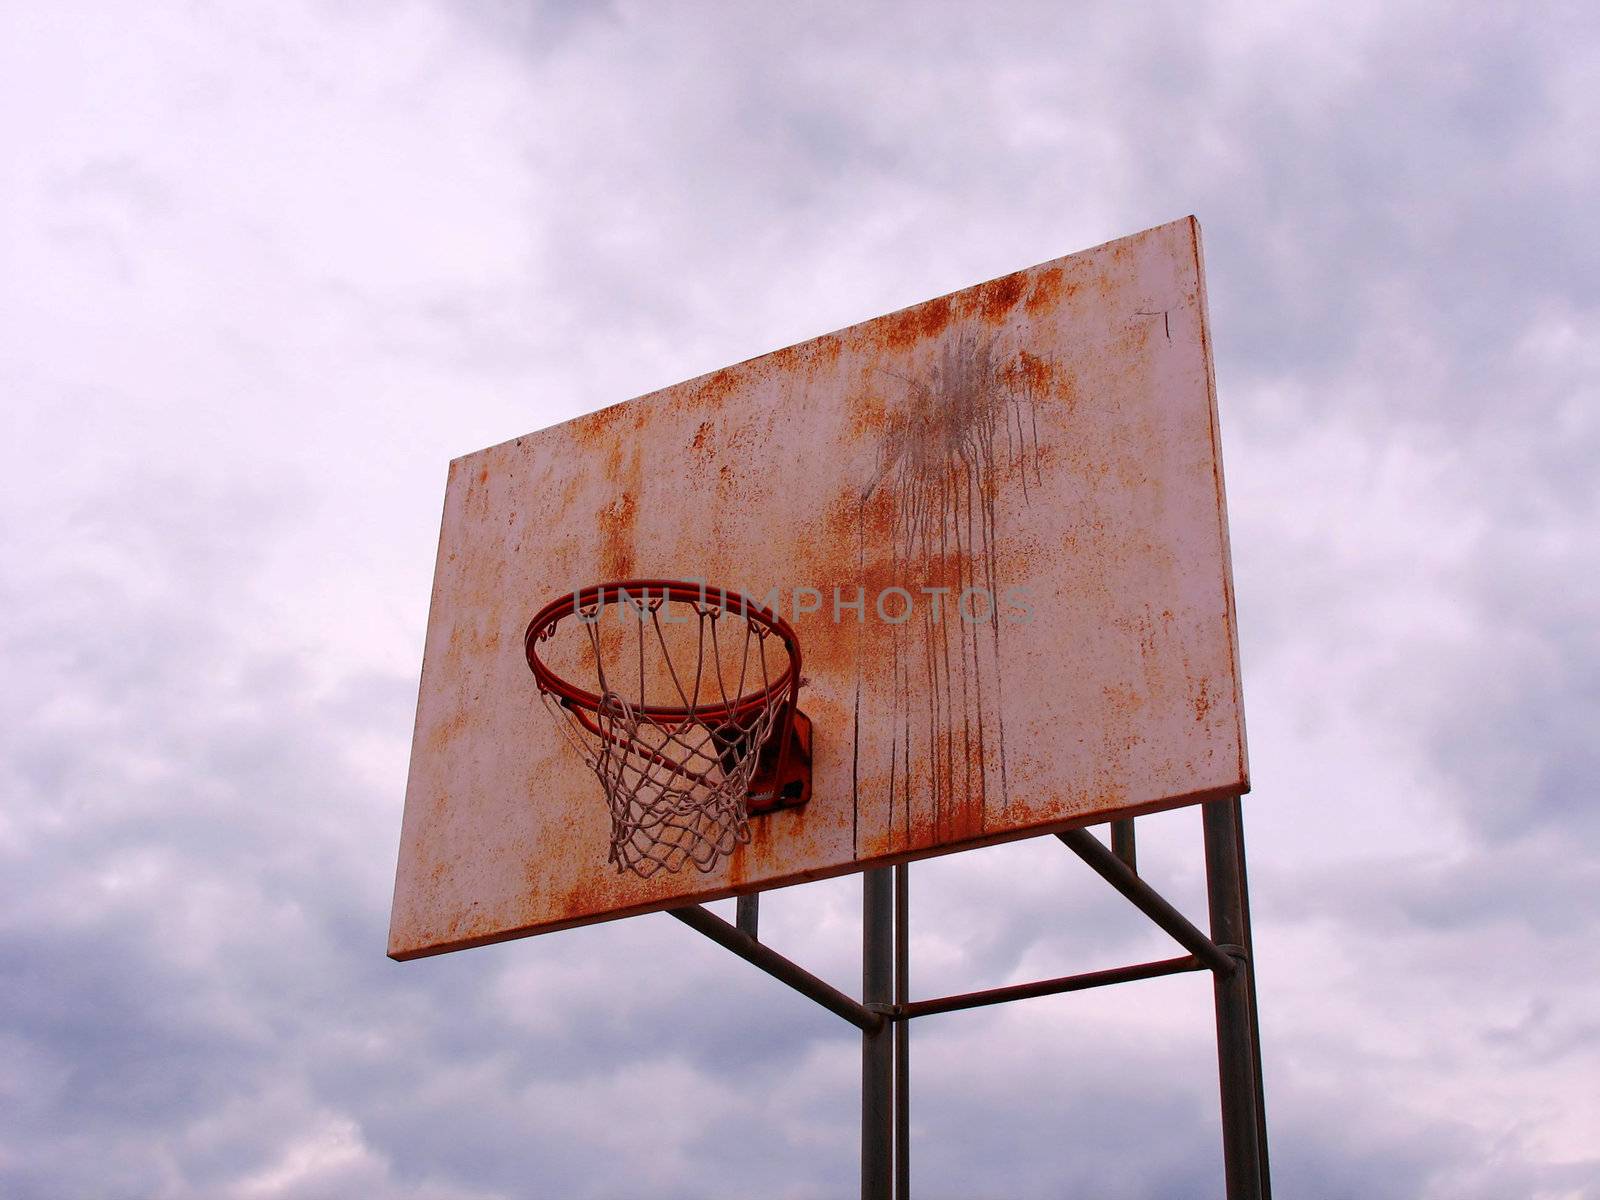 A shot of a playground basketball hoop and backboard.